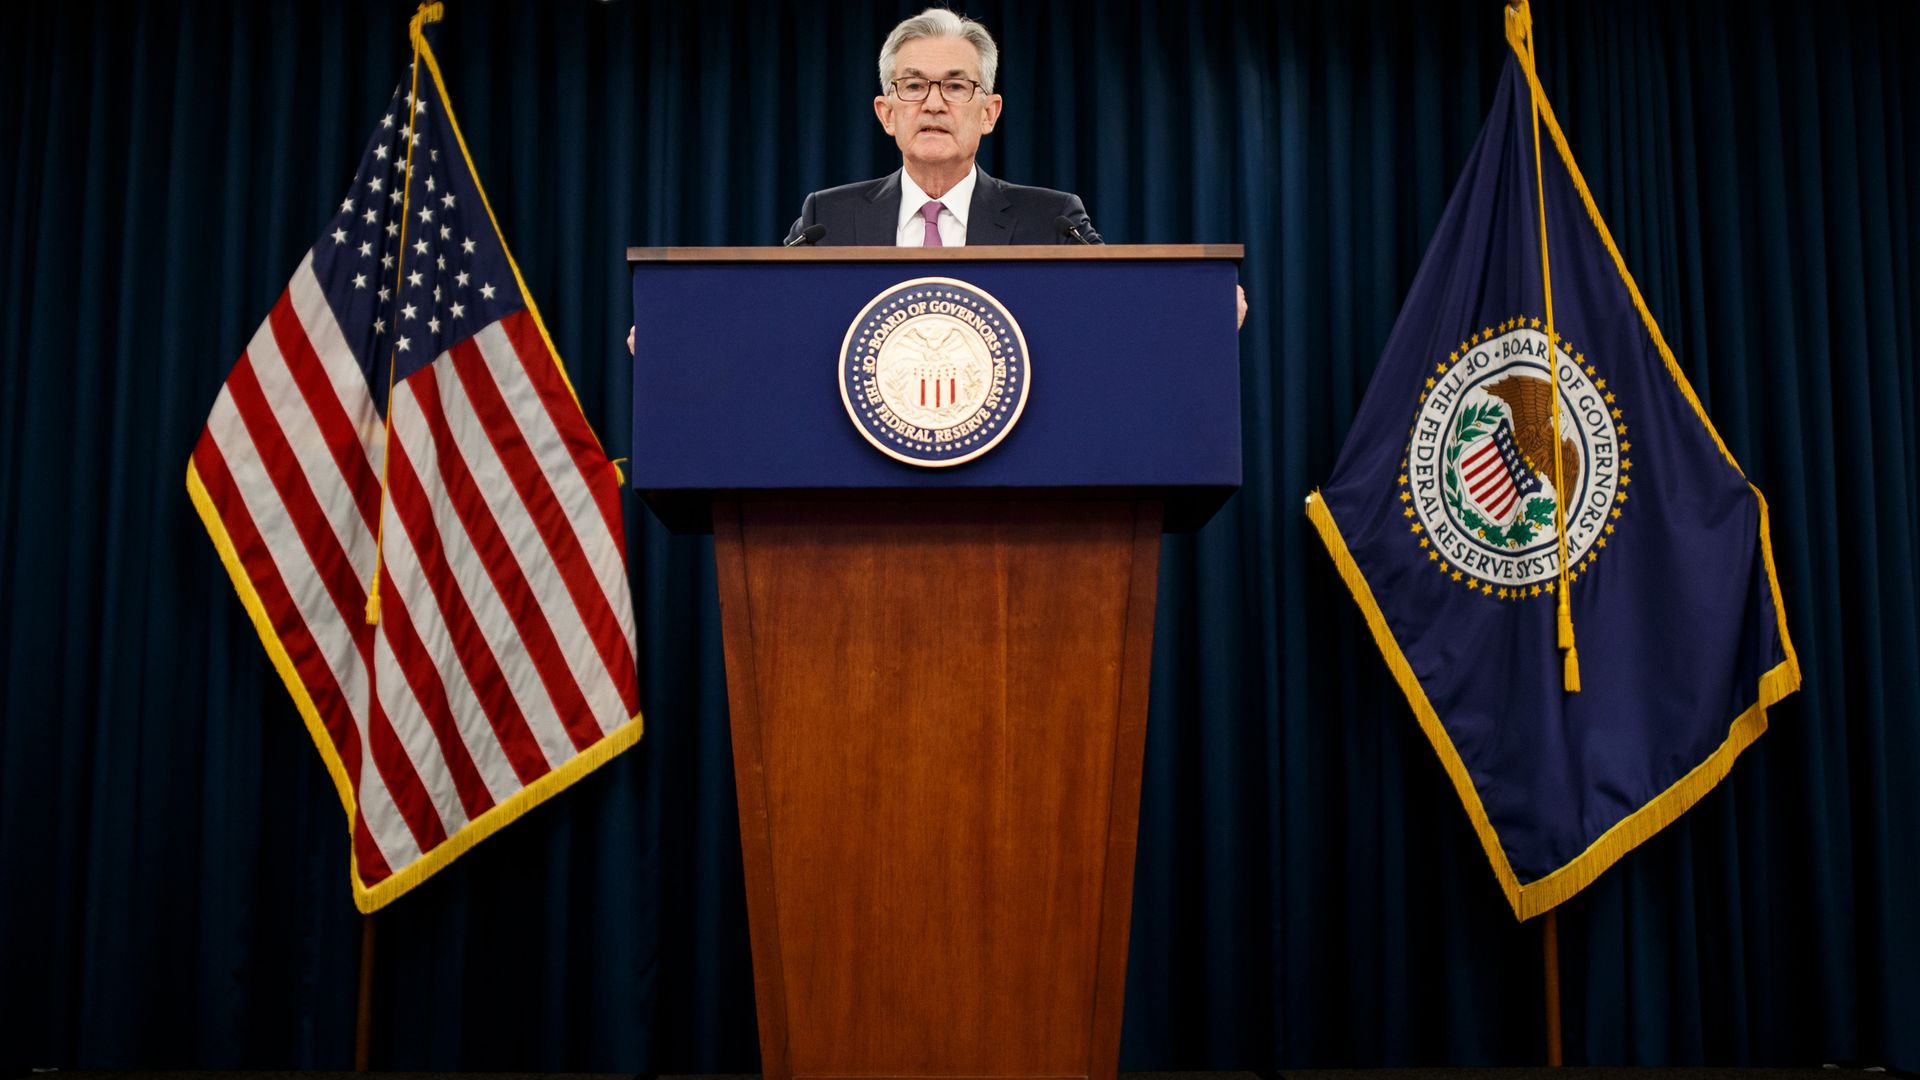 WASHINGTON , June 19, 2019 -- U.S. Federal Reserve Chairman Jerome Powell speaks at a press conference in Washington D.C., the United States, on June 19, 2019